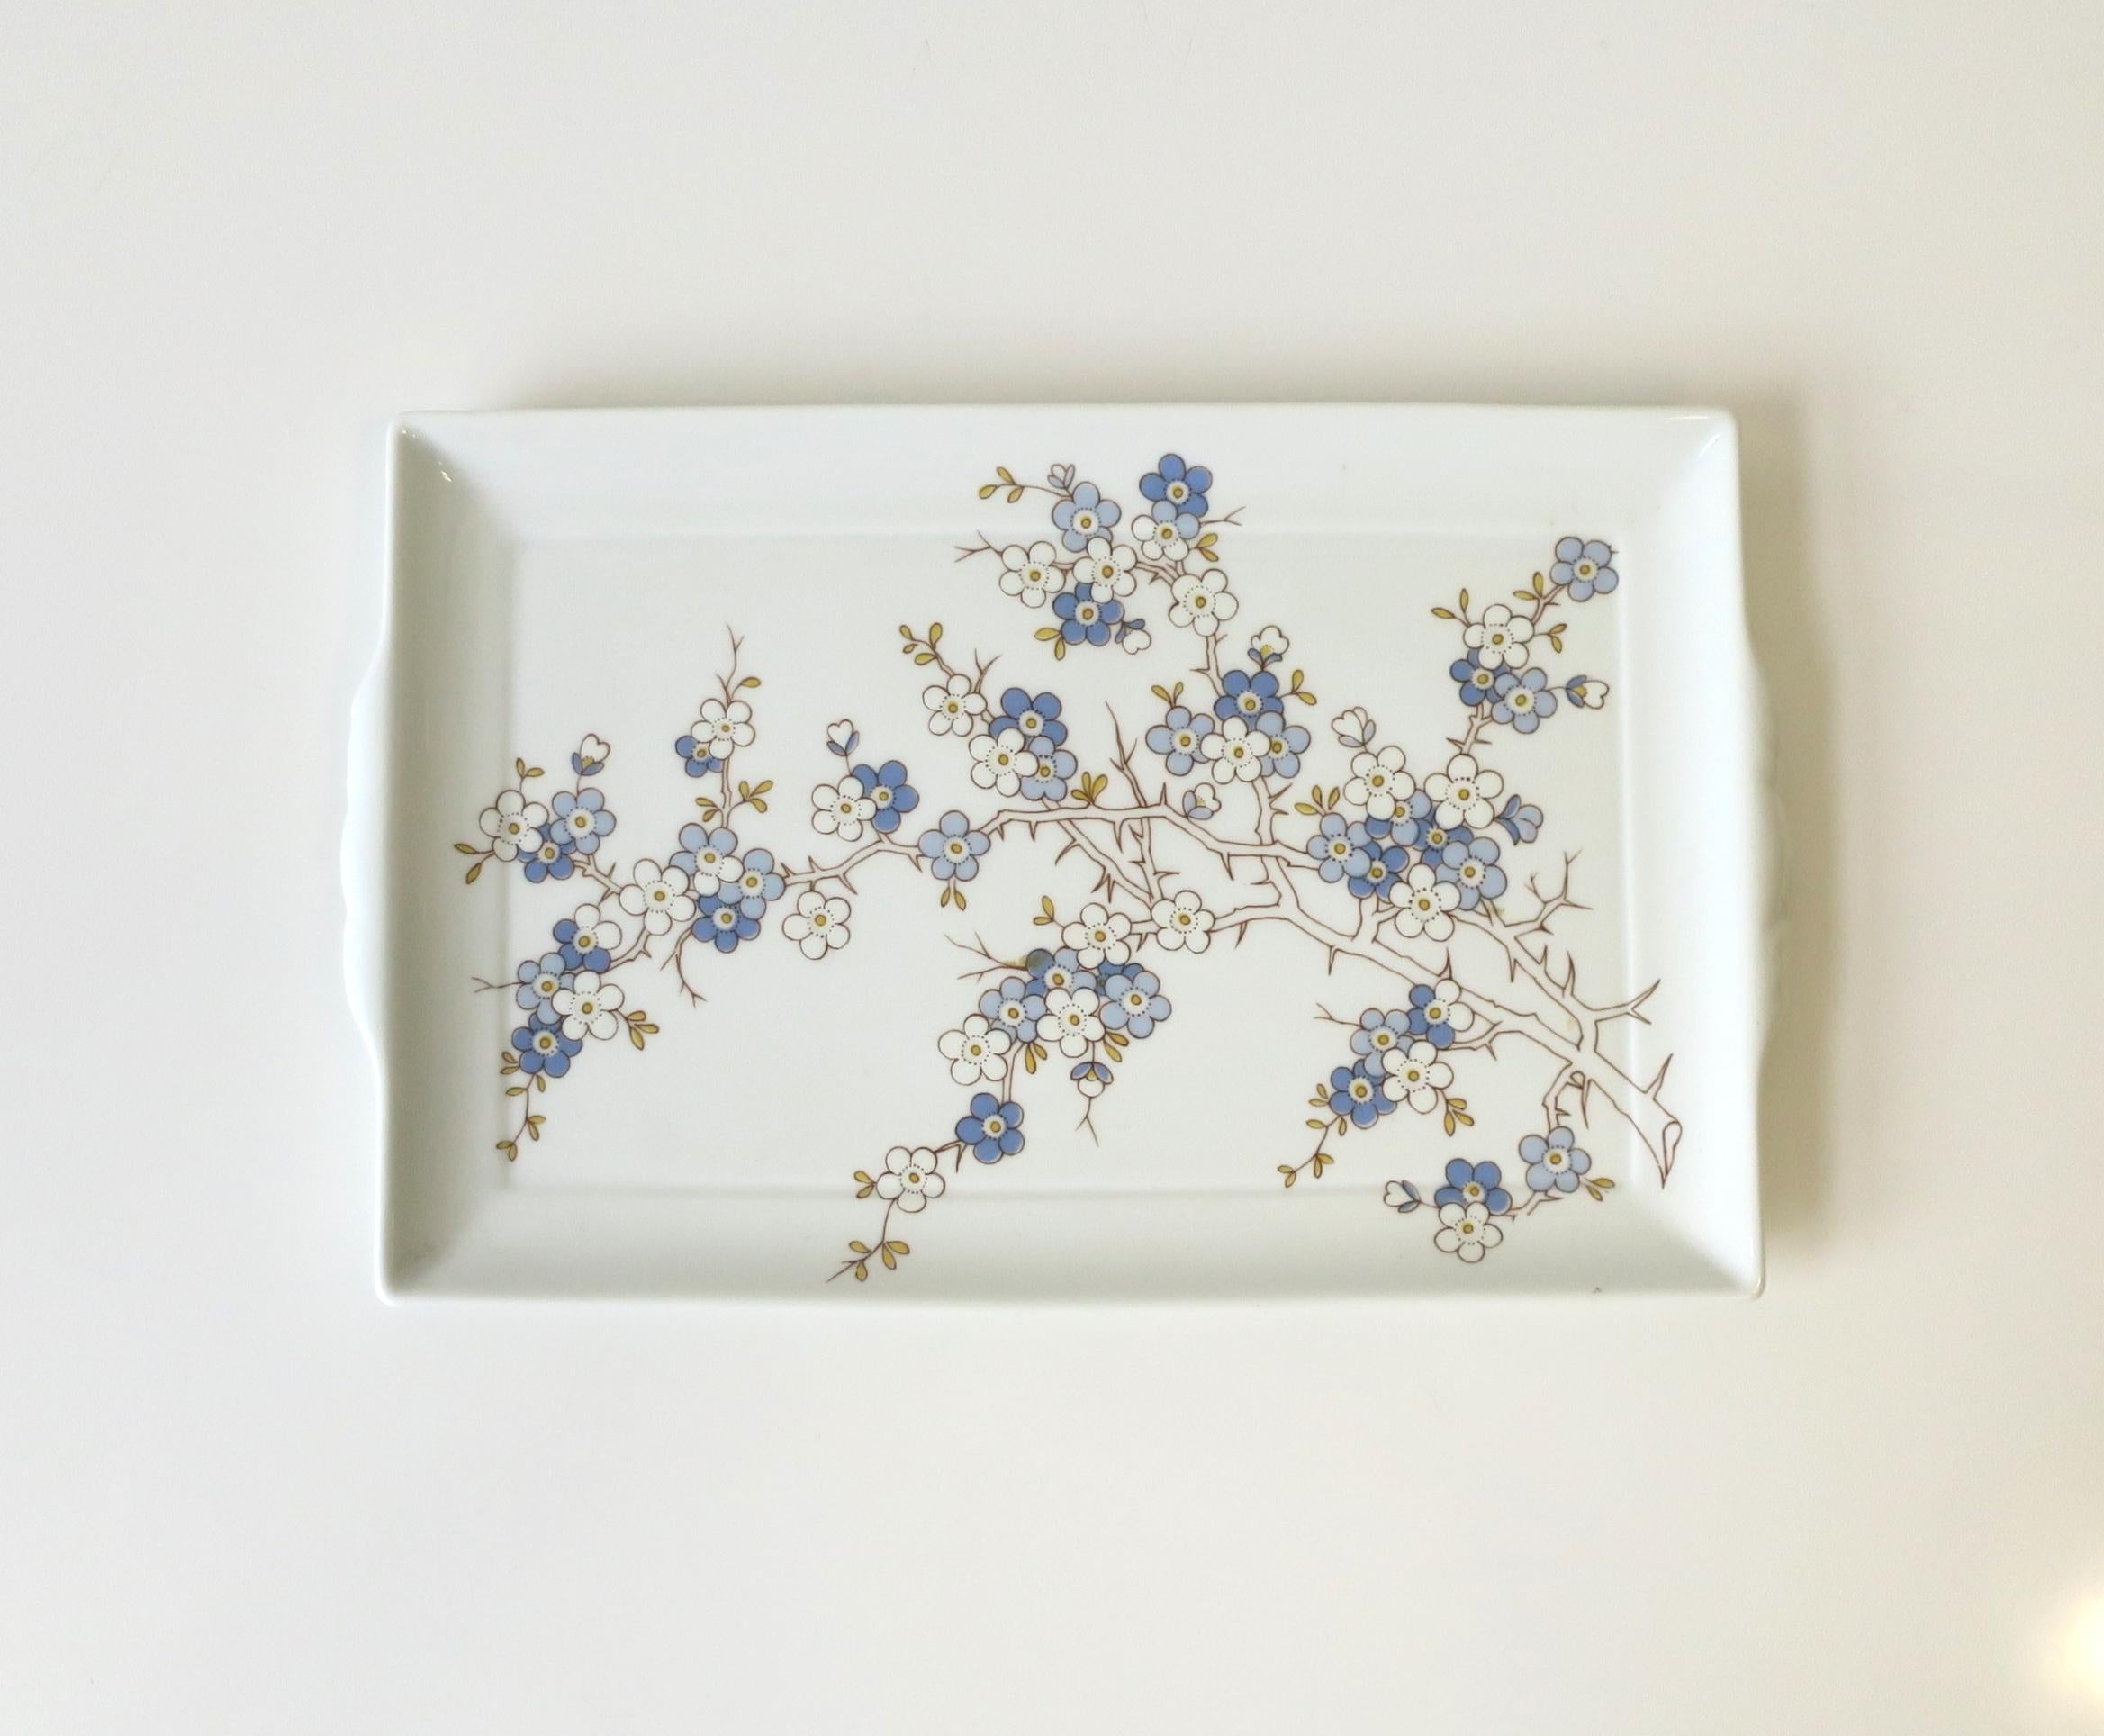 A beautiful vintage Richard Ginori Italian white porcelain vanity or serving tray, circa mid-20th century, Italy. Piece is rectangular with handles and decorated in shades of blue, light blue/periwinkle blue flowers, and tan and brown leaves and